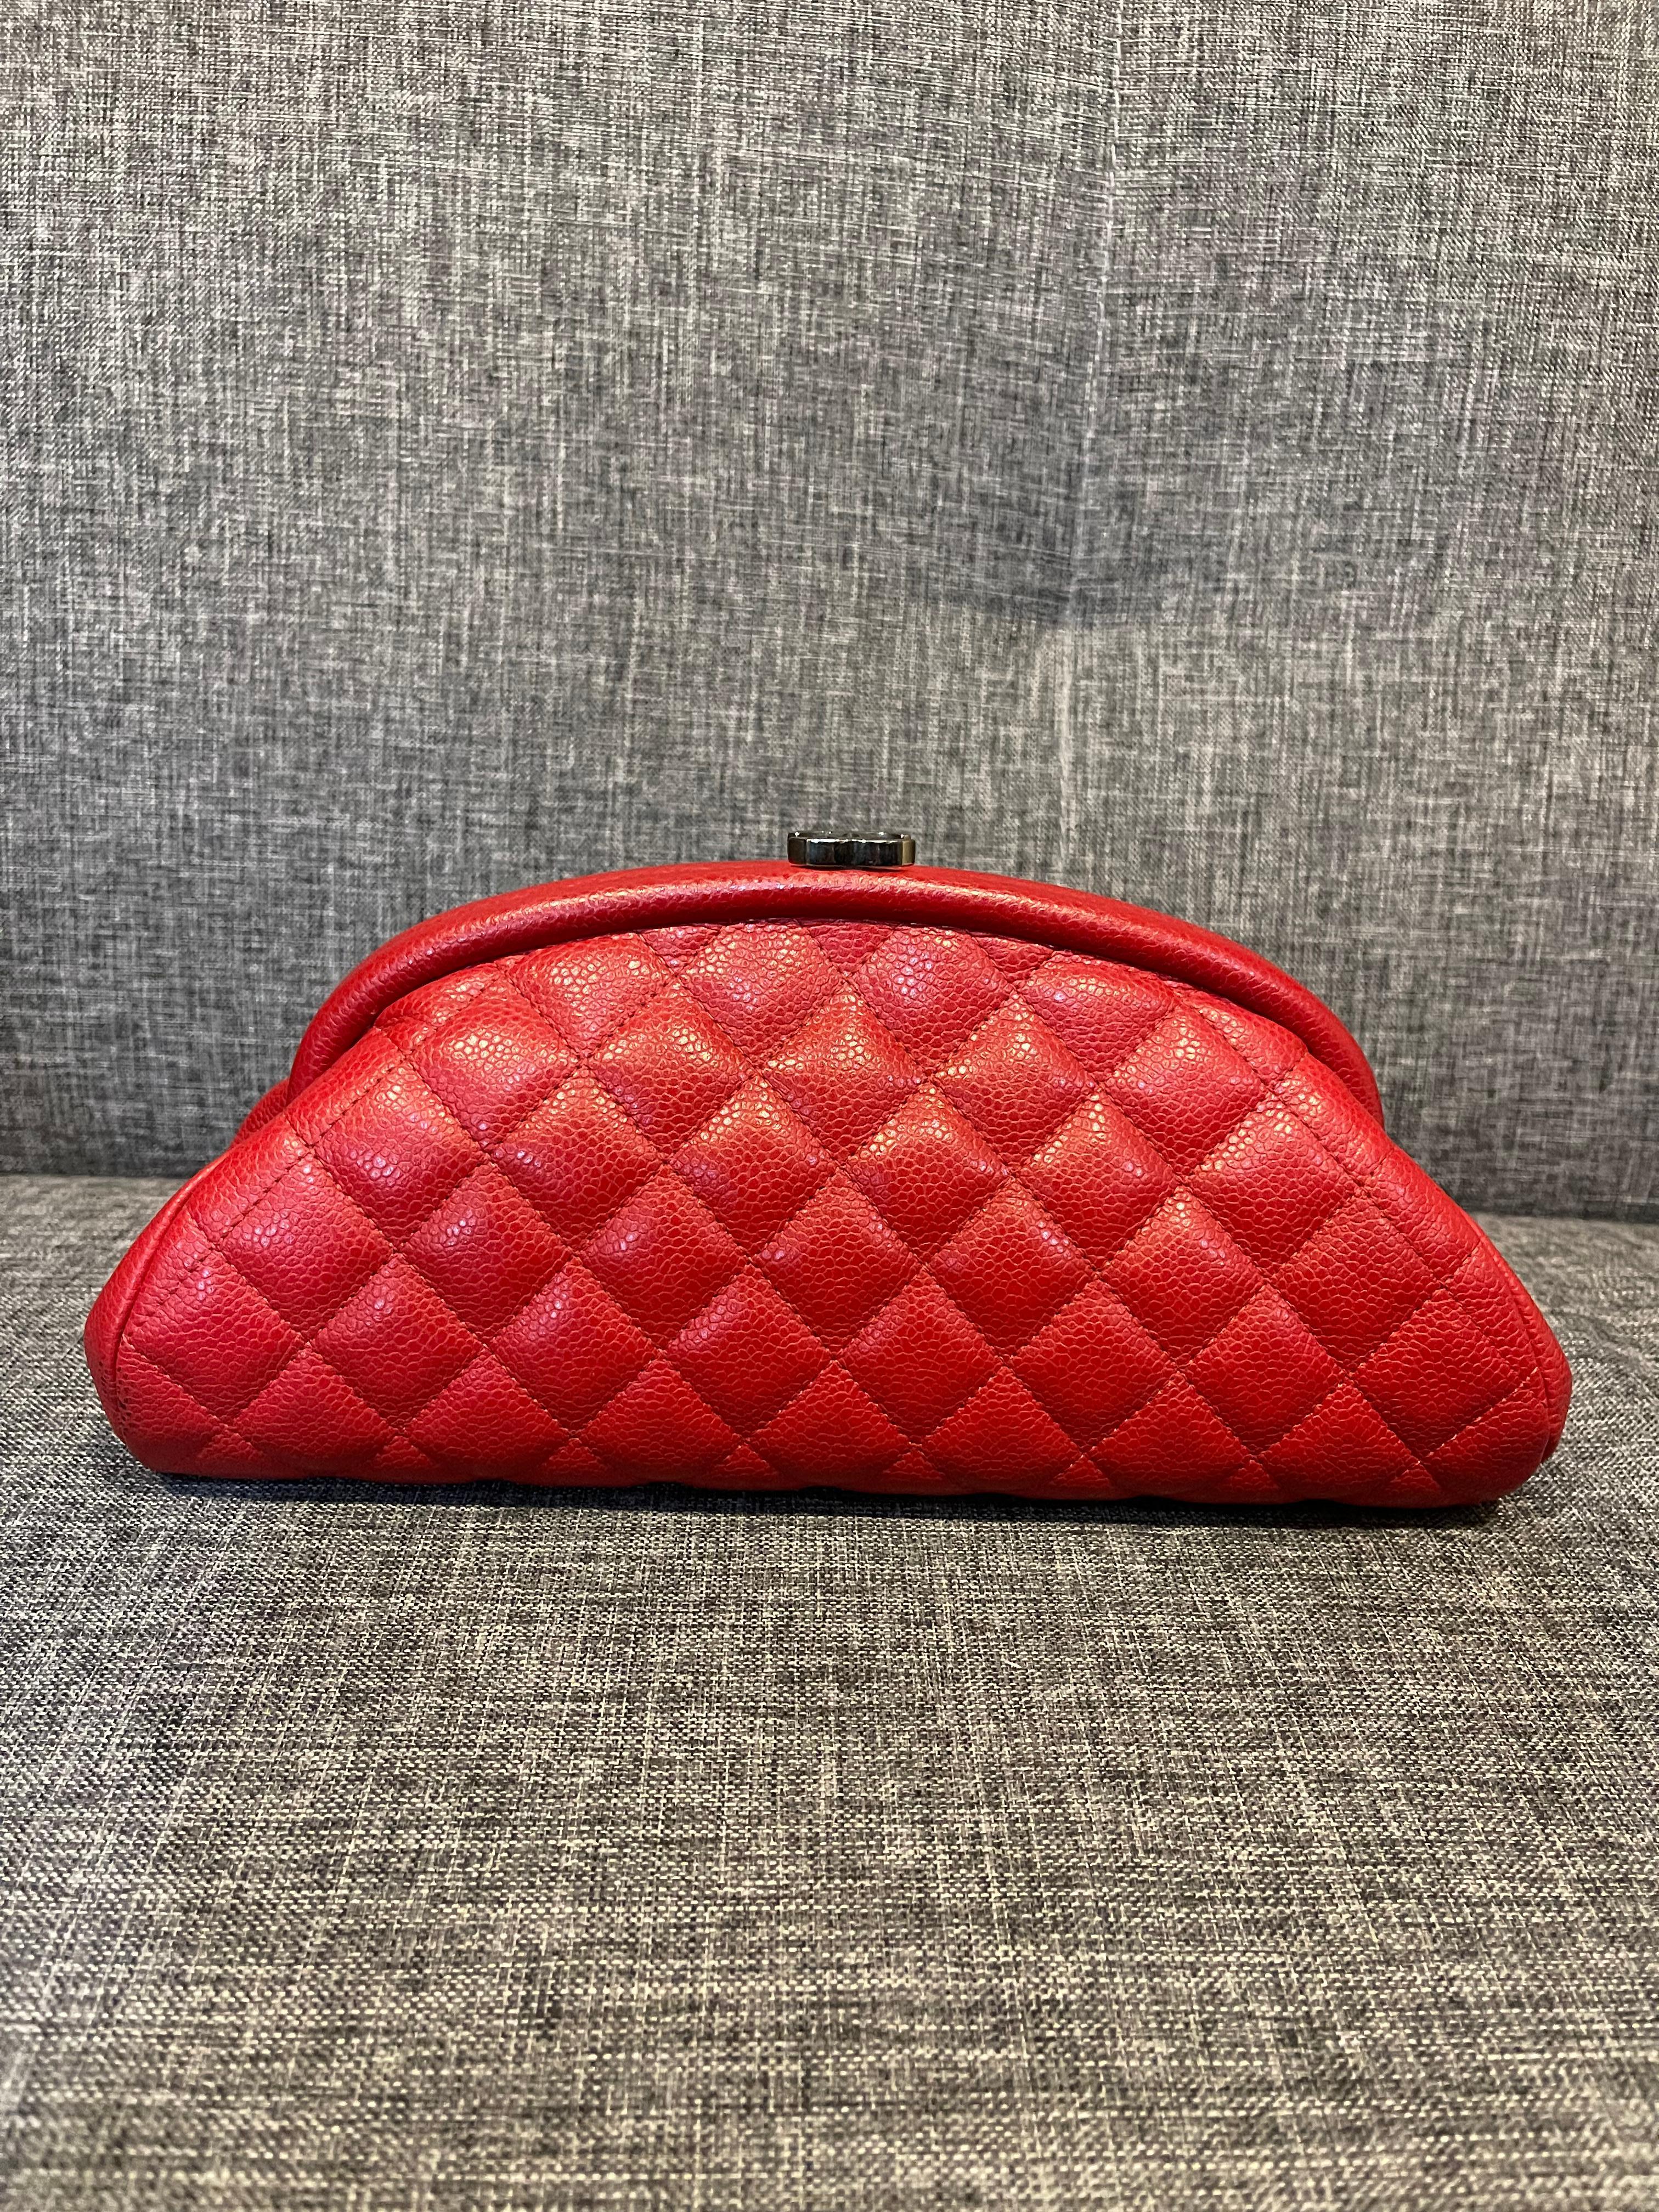 Classic chanel timeless clutch in red caviar leather. Overall still in excellent condition. No significant signs of wear. Comes with its holo and card. Replacement dust bag will be given. Series #19. 